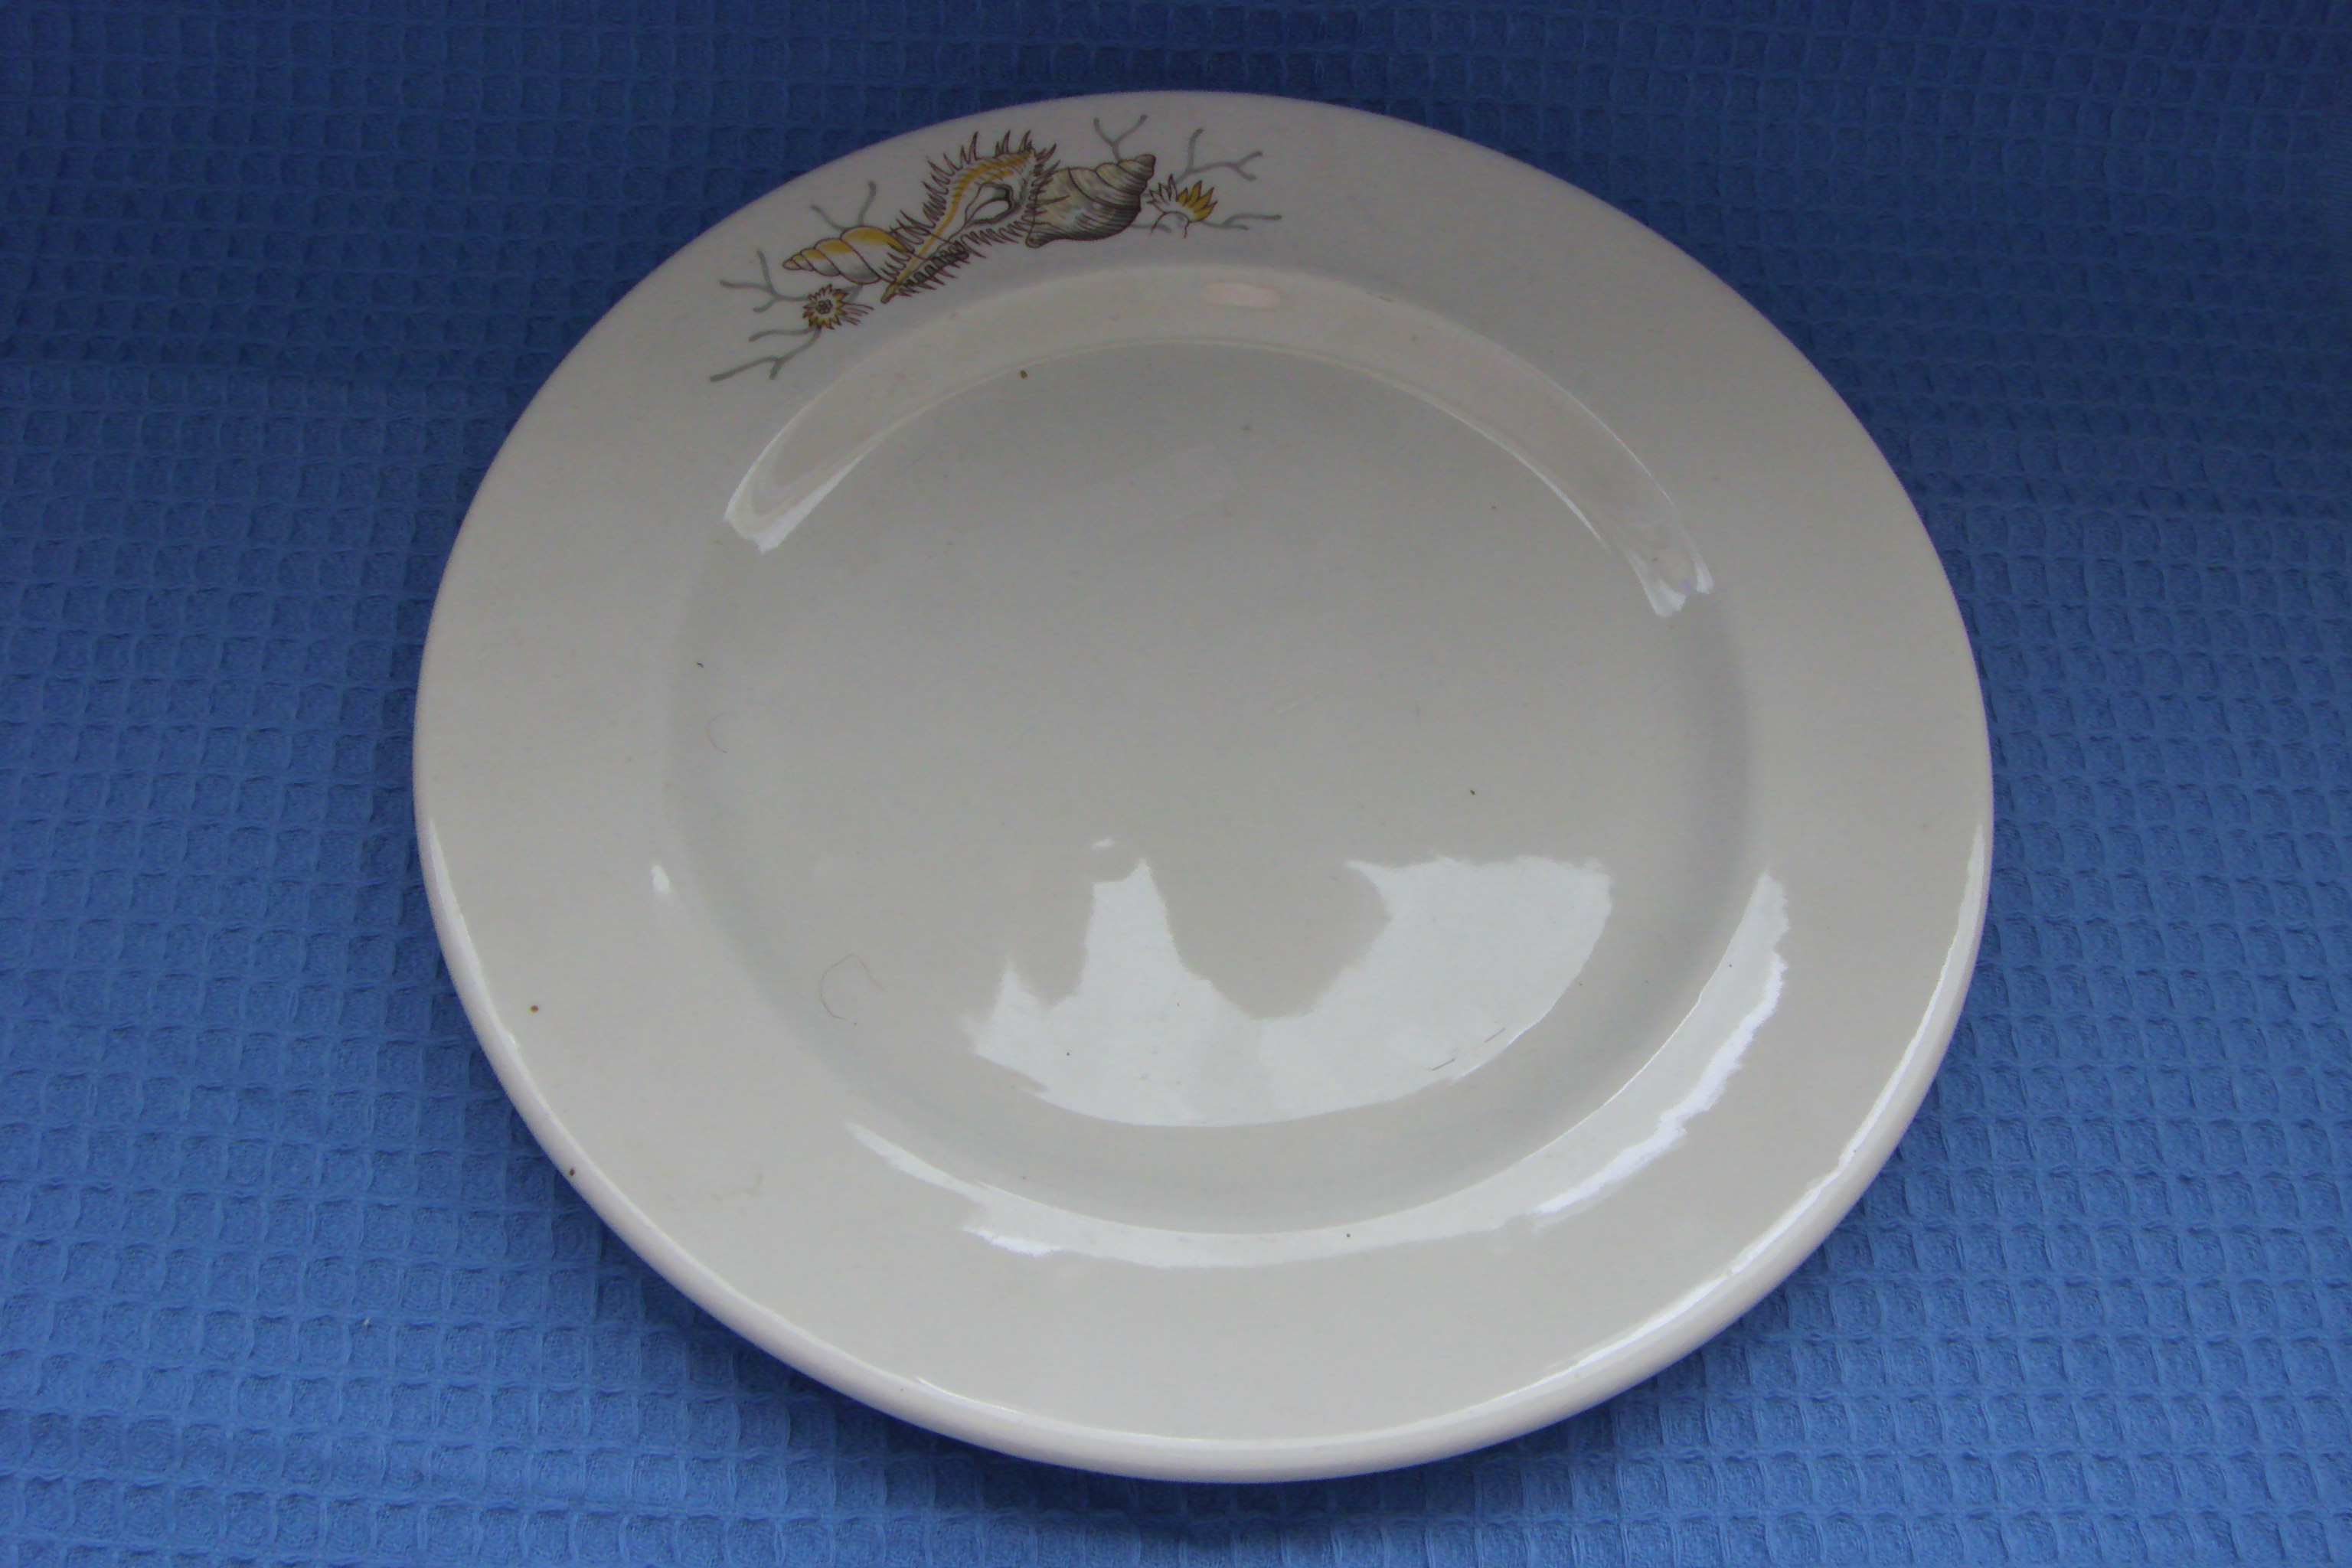 SEASHELL DESIGN LARGE SIZED DINNER PLATE FROM THE ORIENT LINE